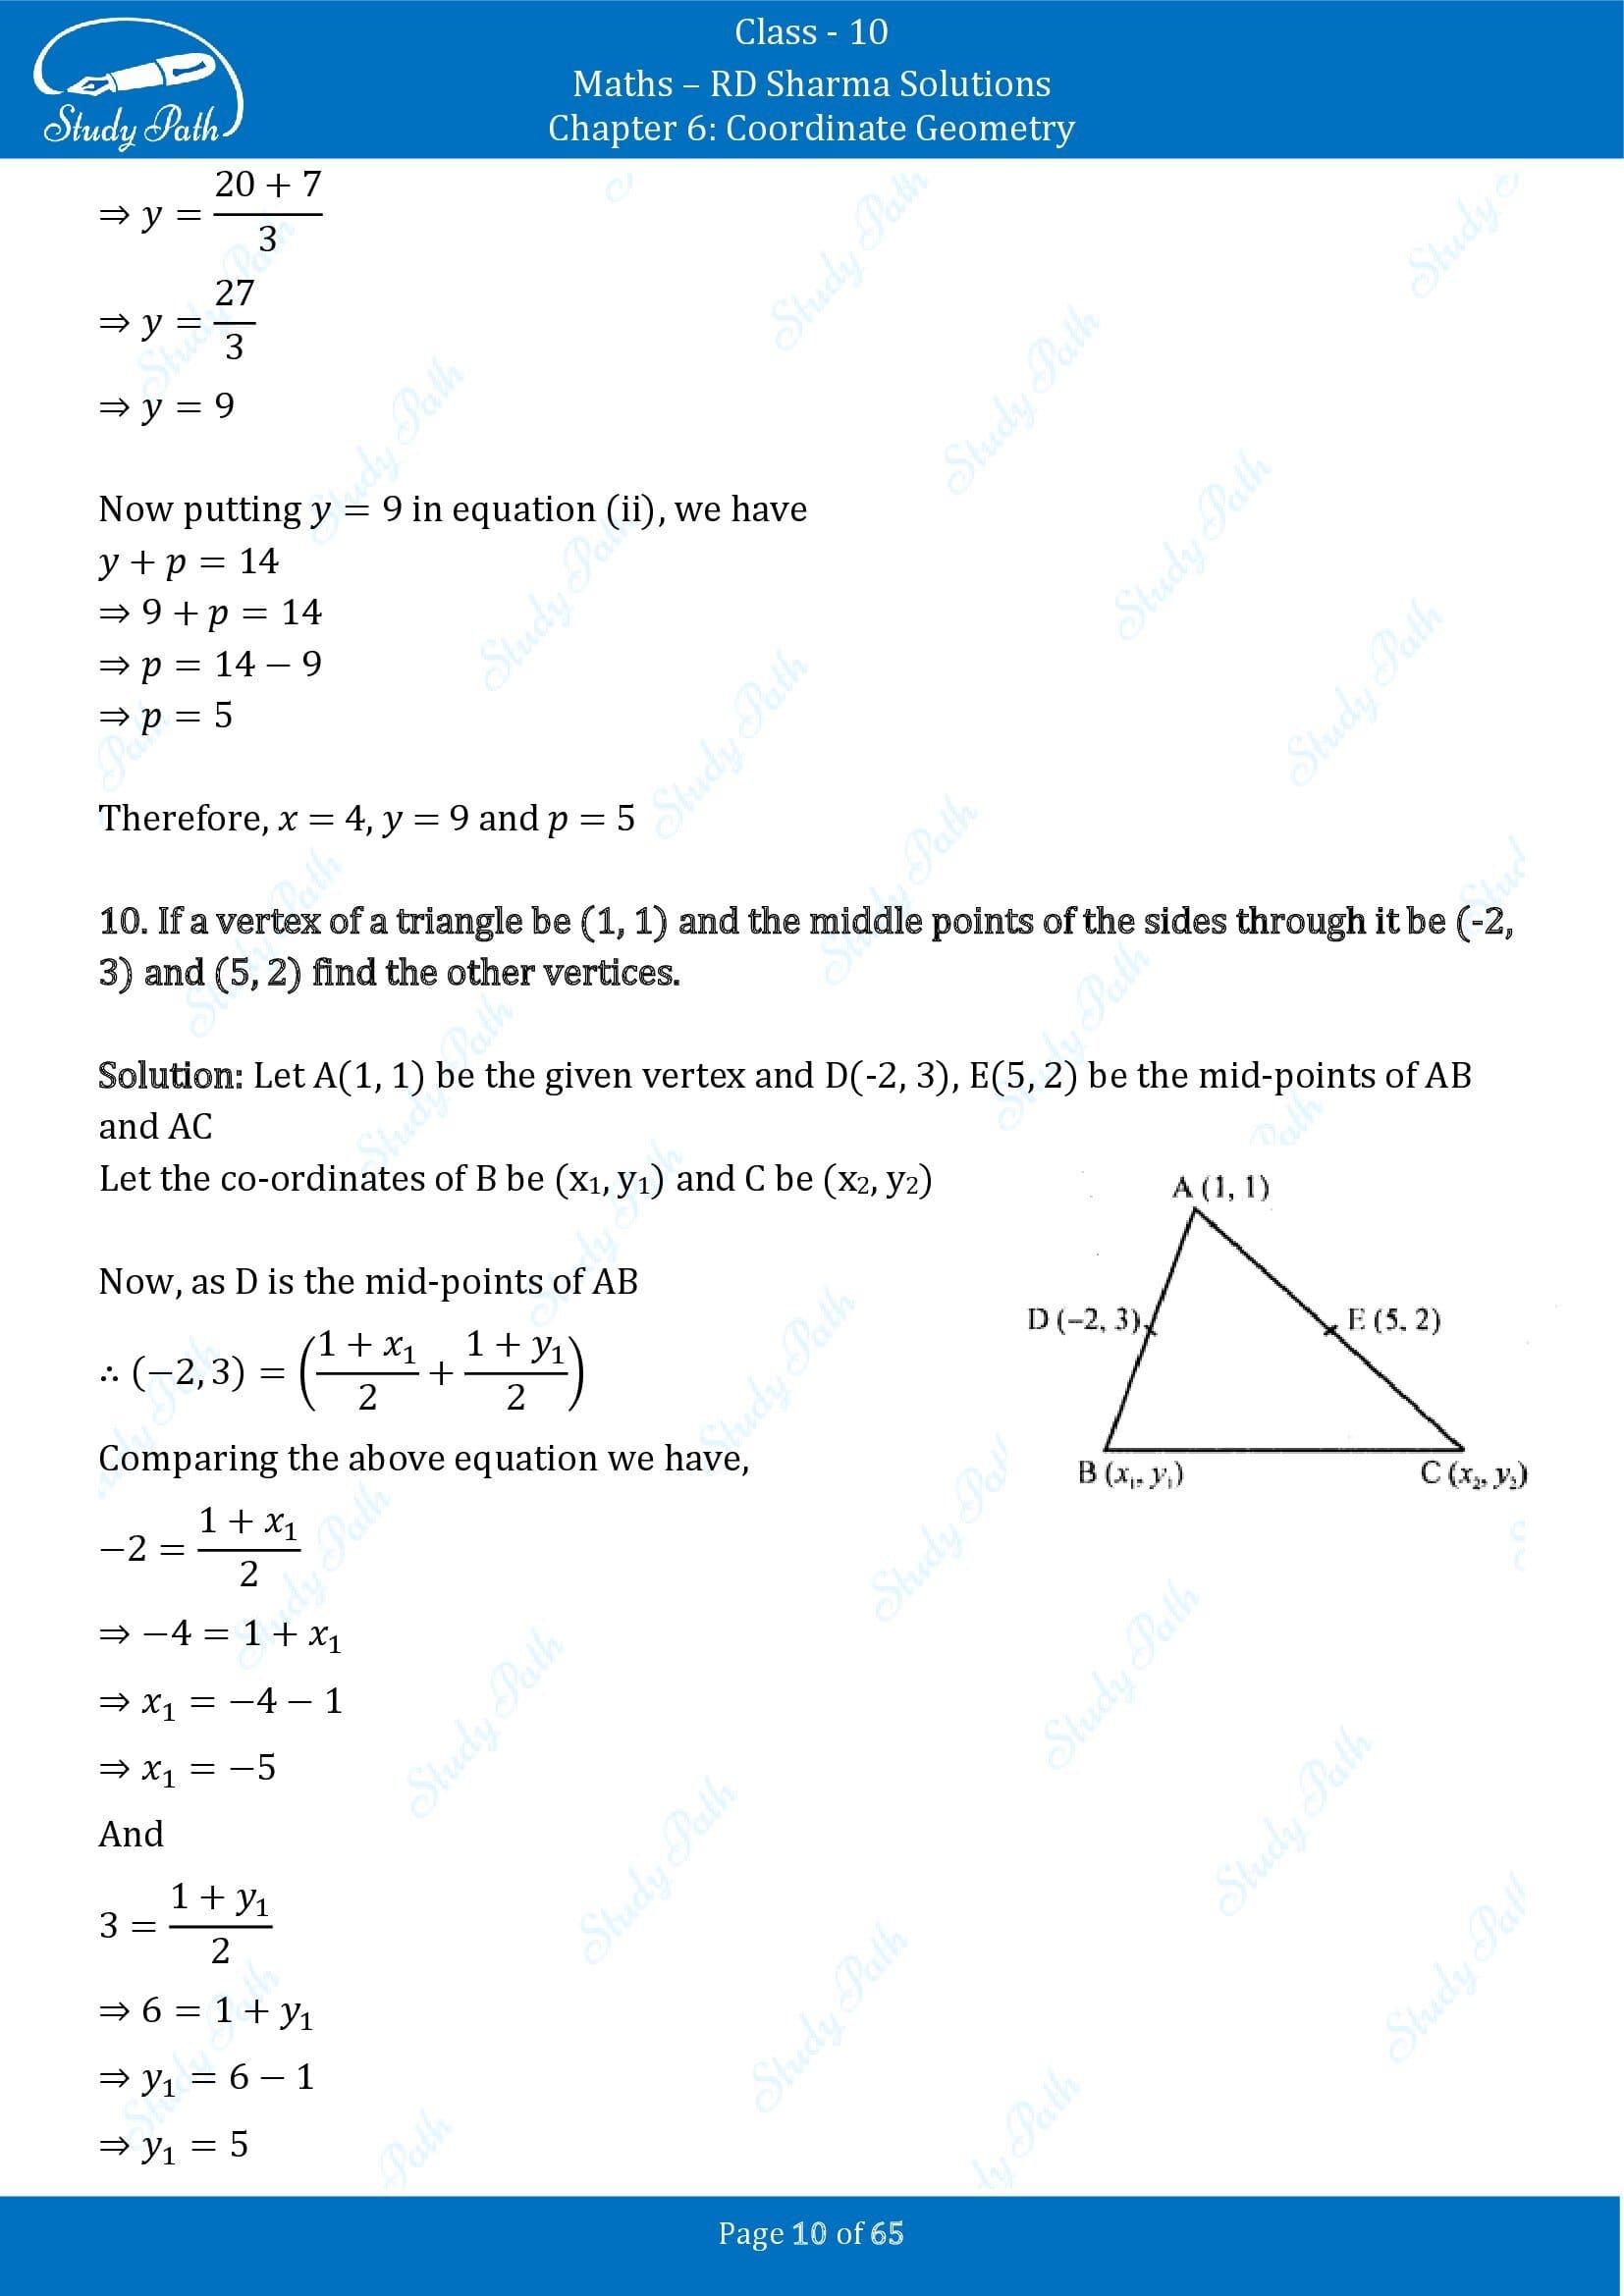 RD Sharma Solutions Class 10 Chapter 6 Coordinate Geometry Exercise 6.3 00010